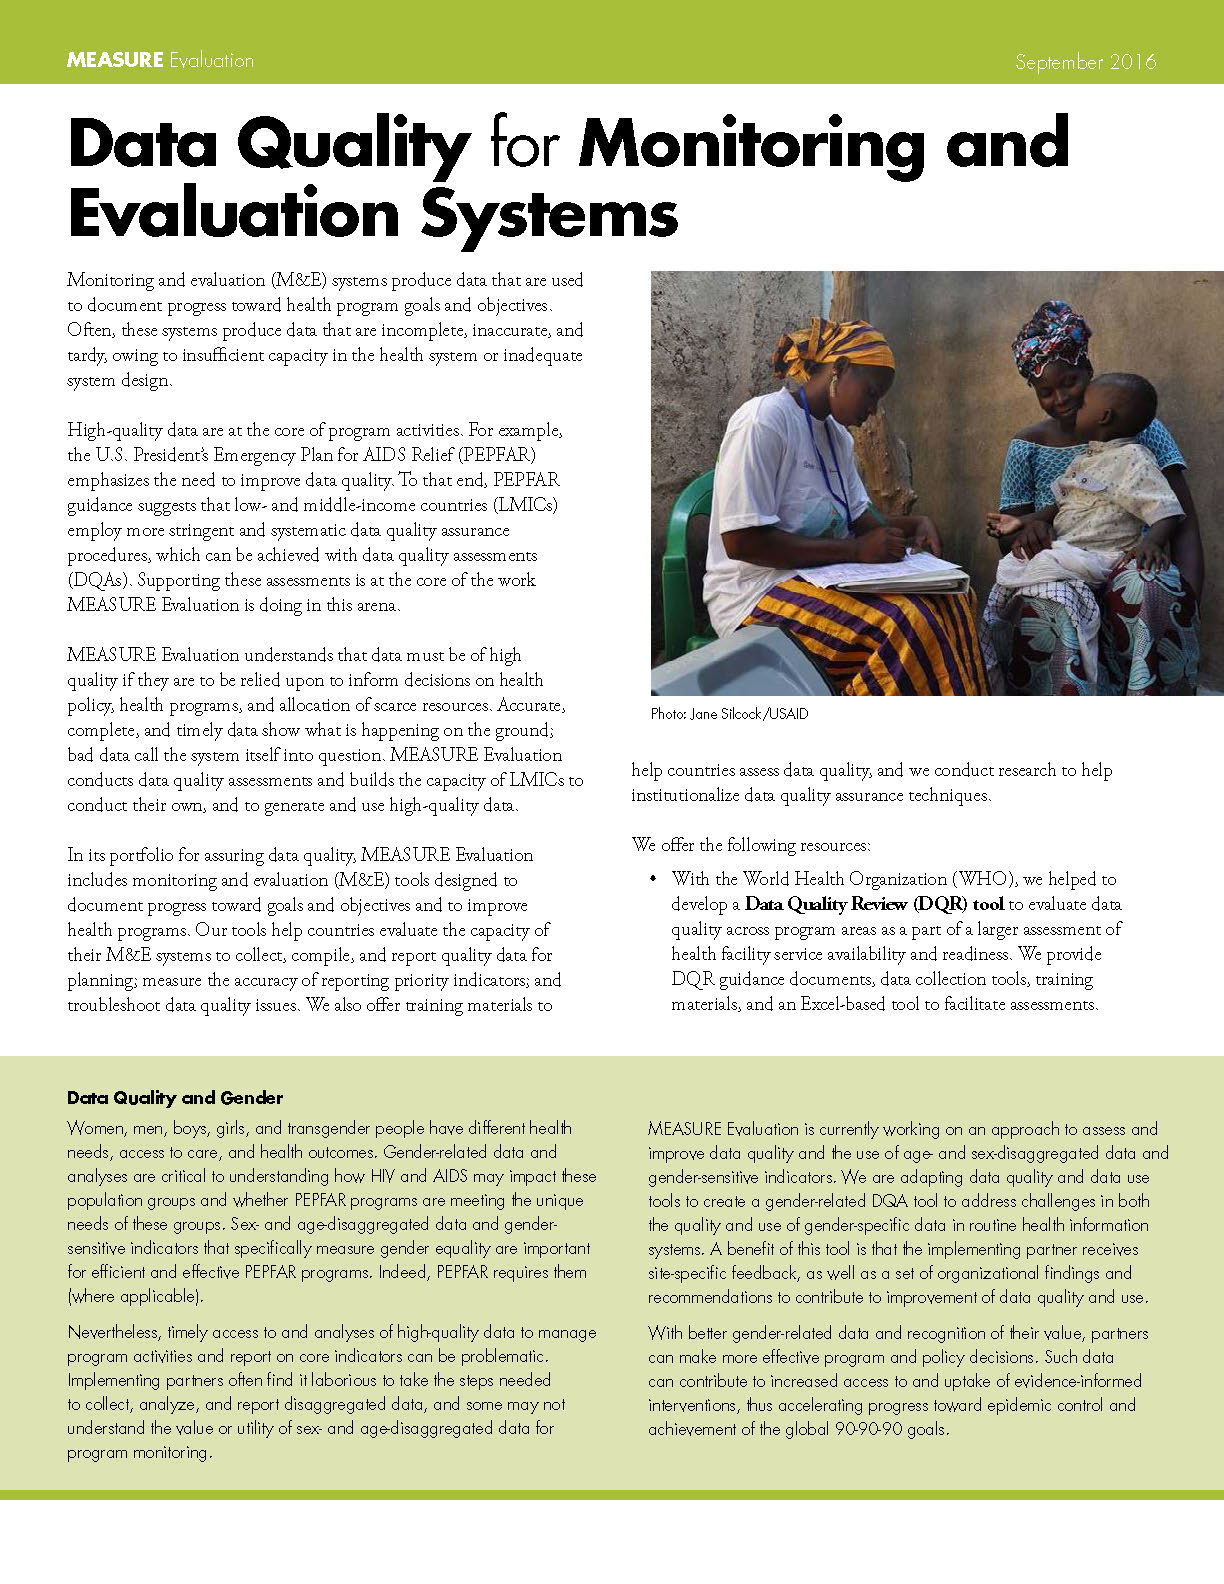 Data Quality for Monitoring and Evaluation Systems